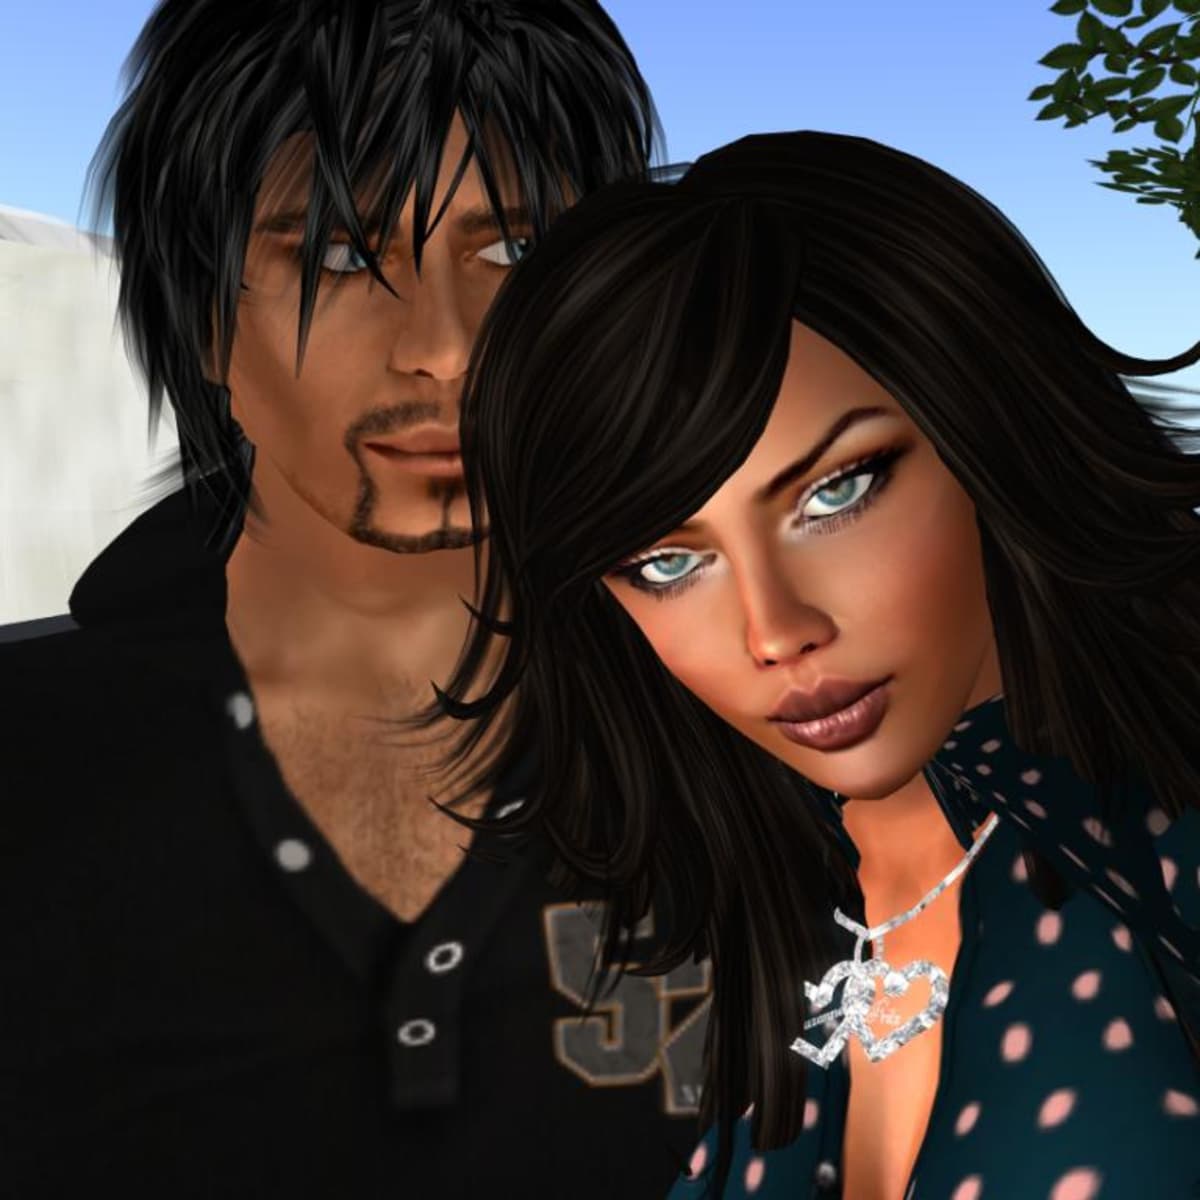 Top 10 Online Dating Games: Dating Simulation in Virtual Worlds - LevelSkip